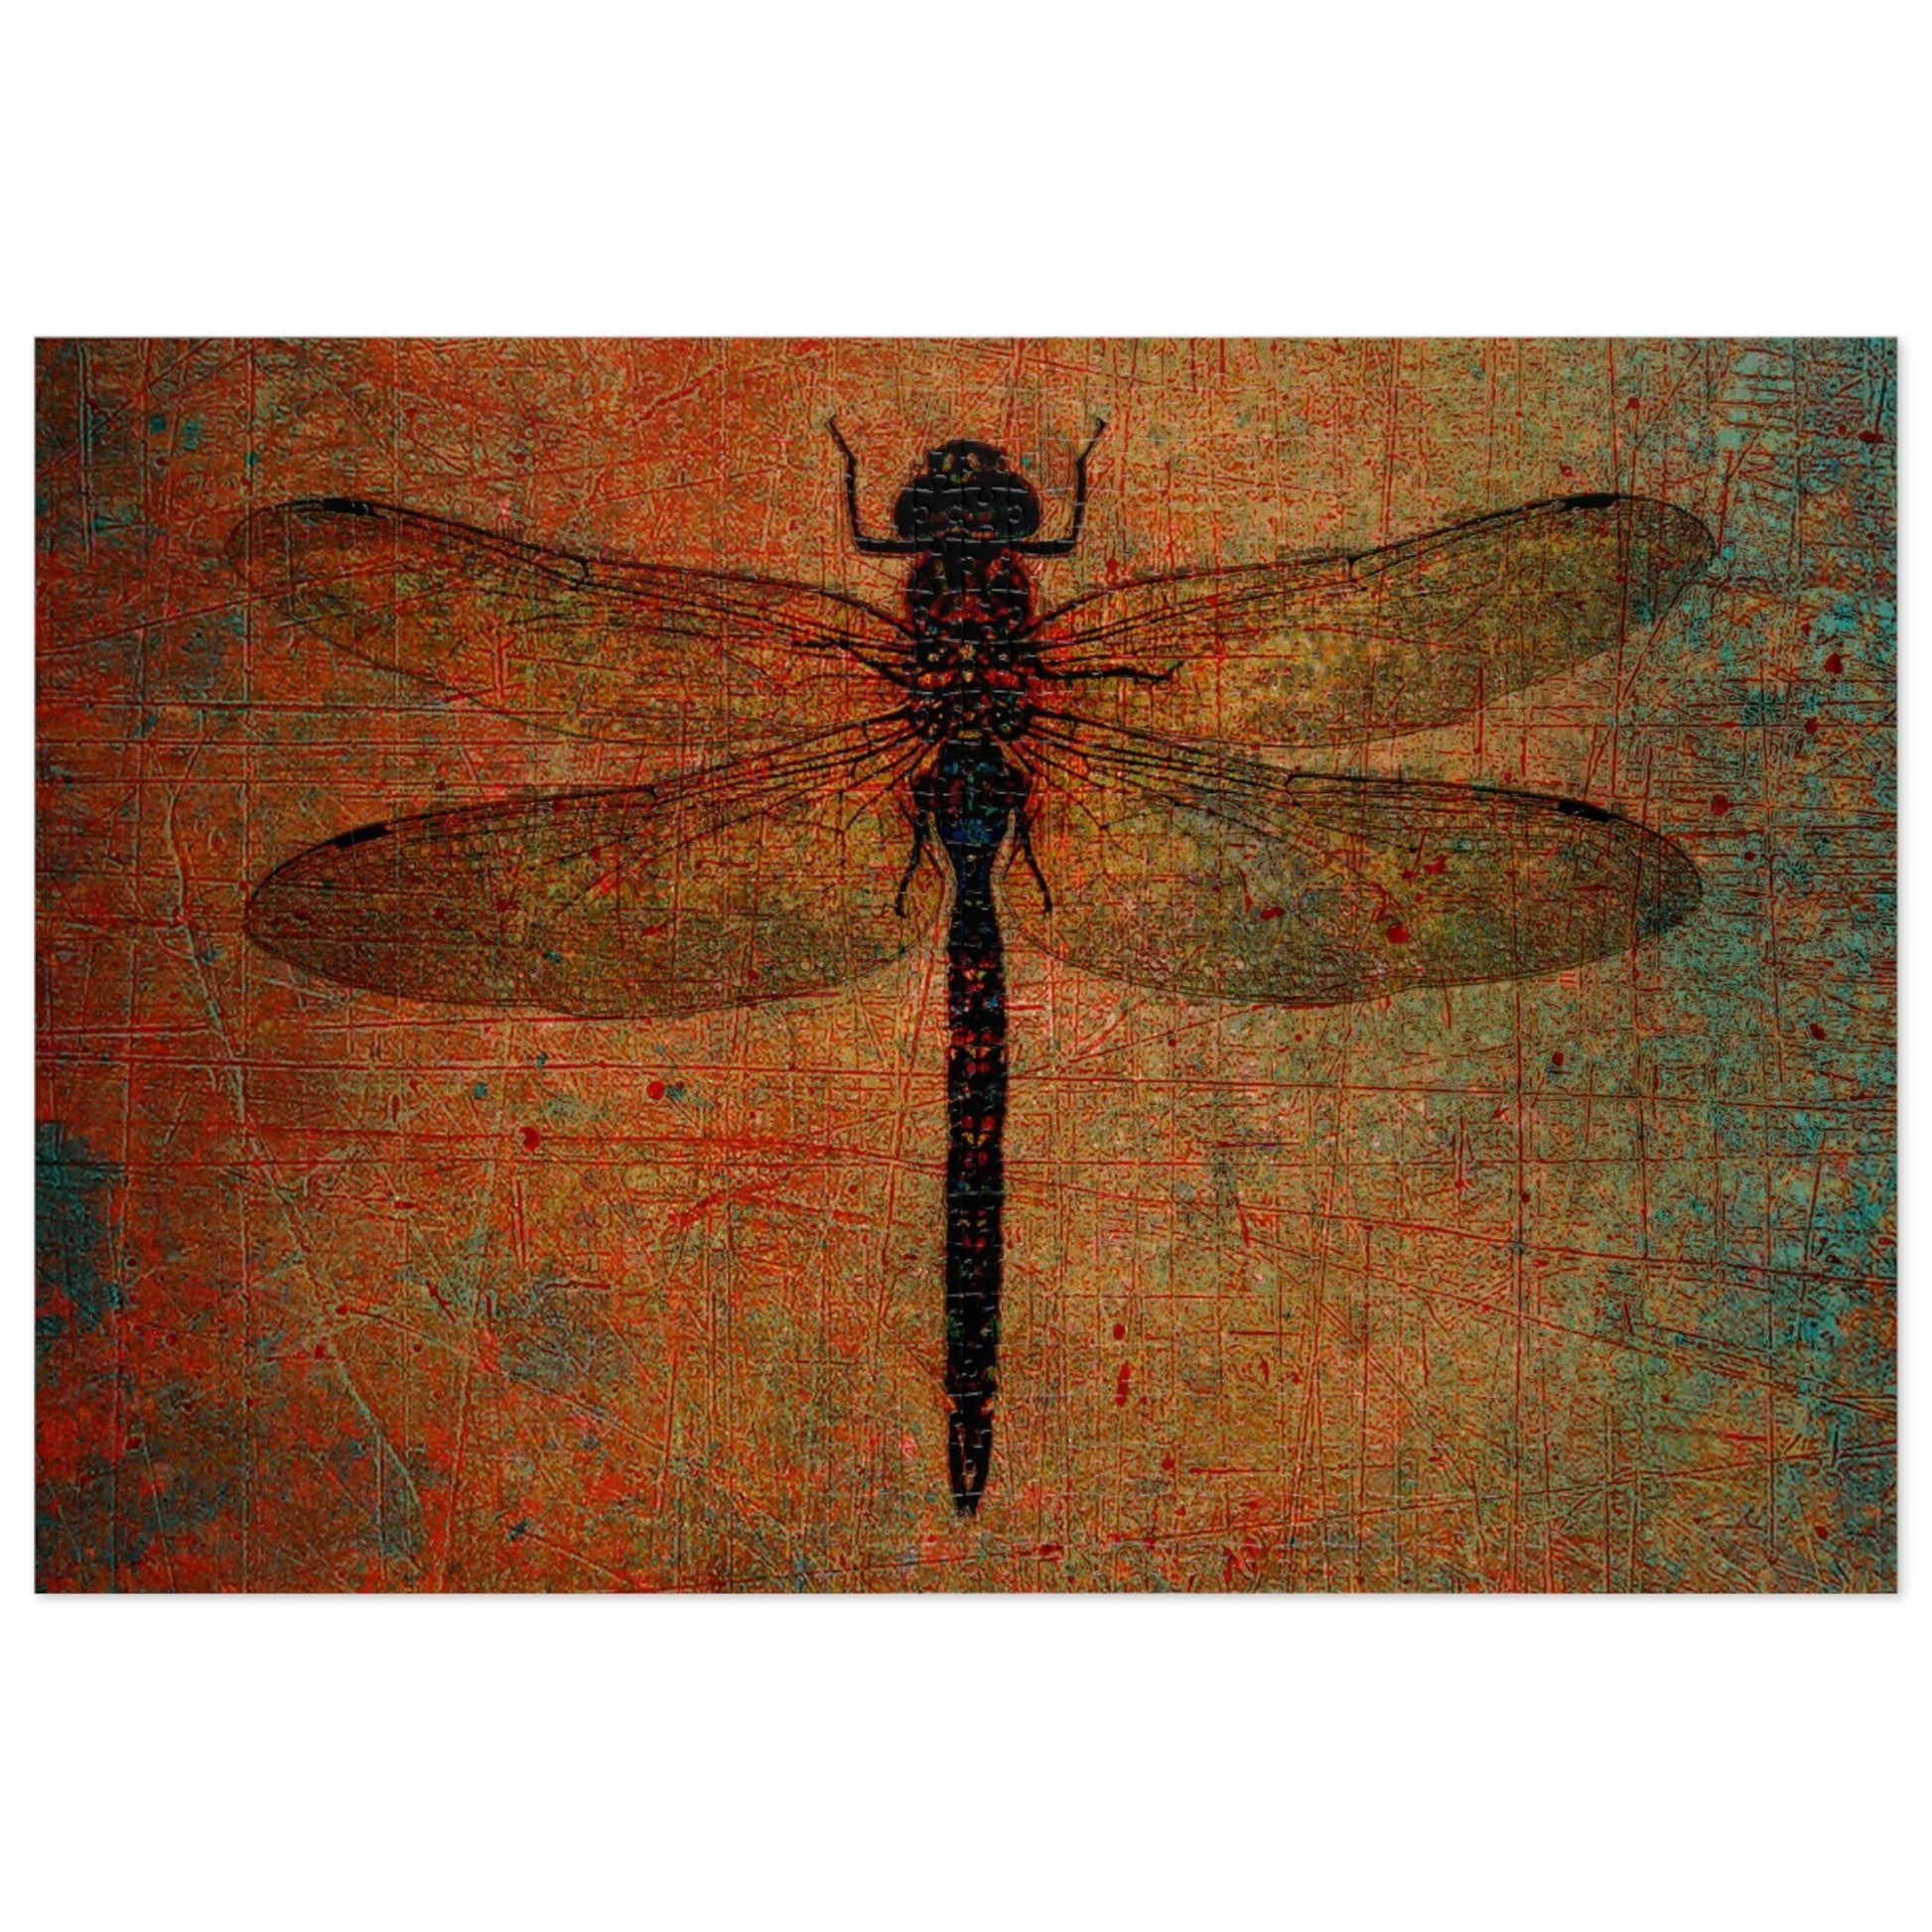 Dragonfly on Brown Stone Background Puzzle 1000 piece